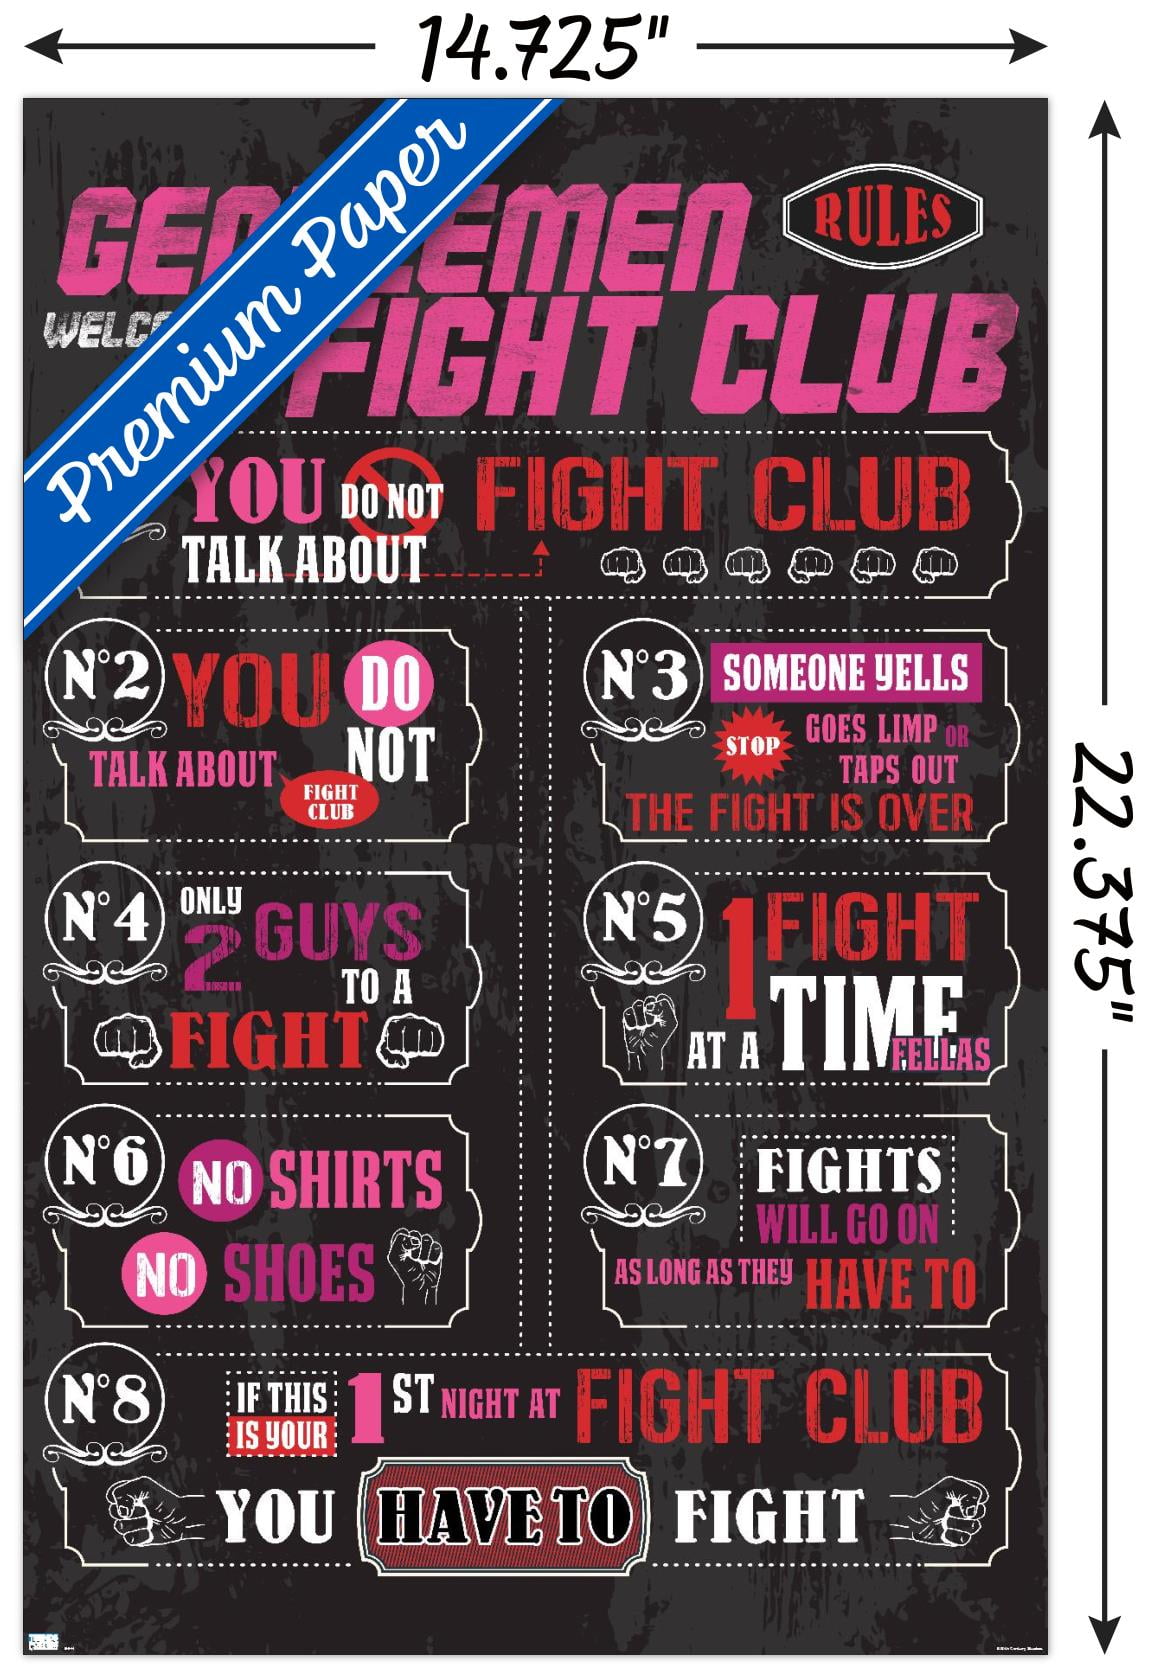 Fight Club - Rules Wall Poster, 22.375 x 34, Framed 